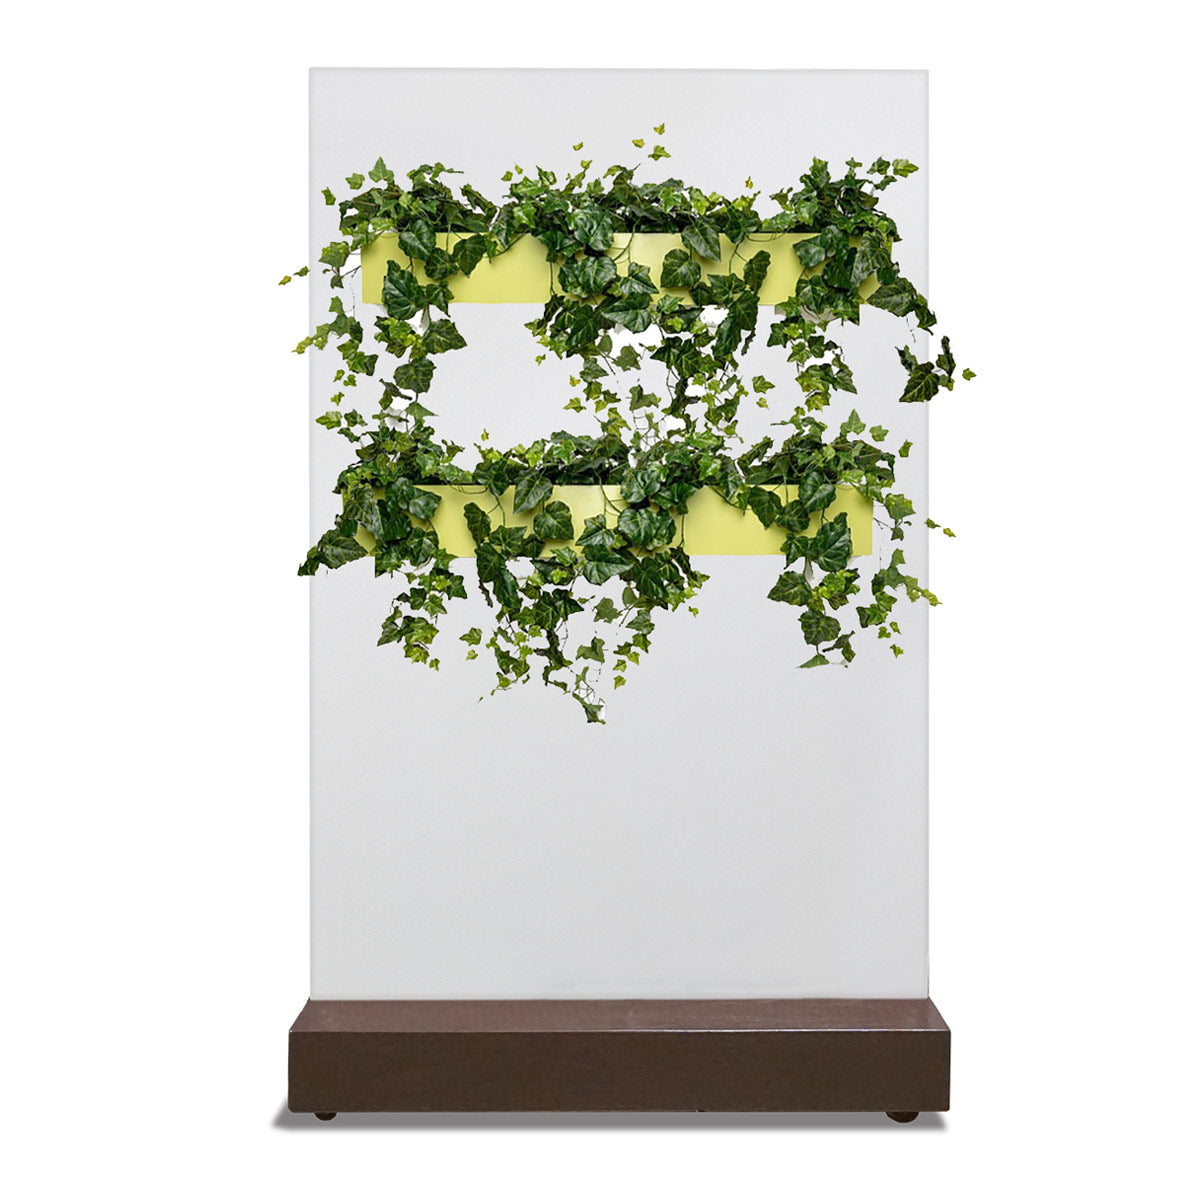 Green Wall, English Ivy Planter for Movable Partition Wall